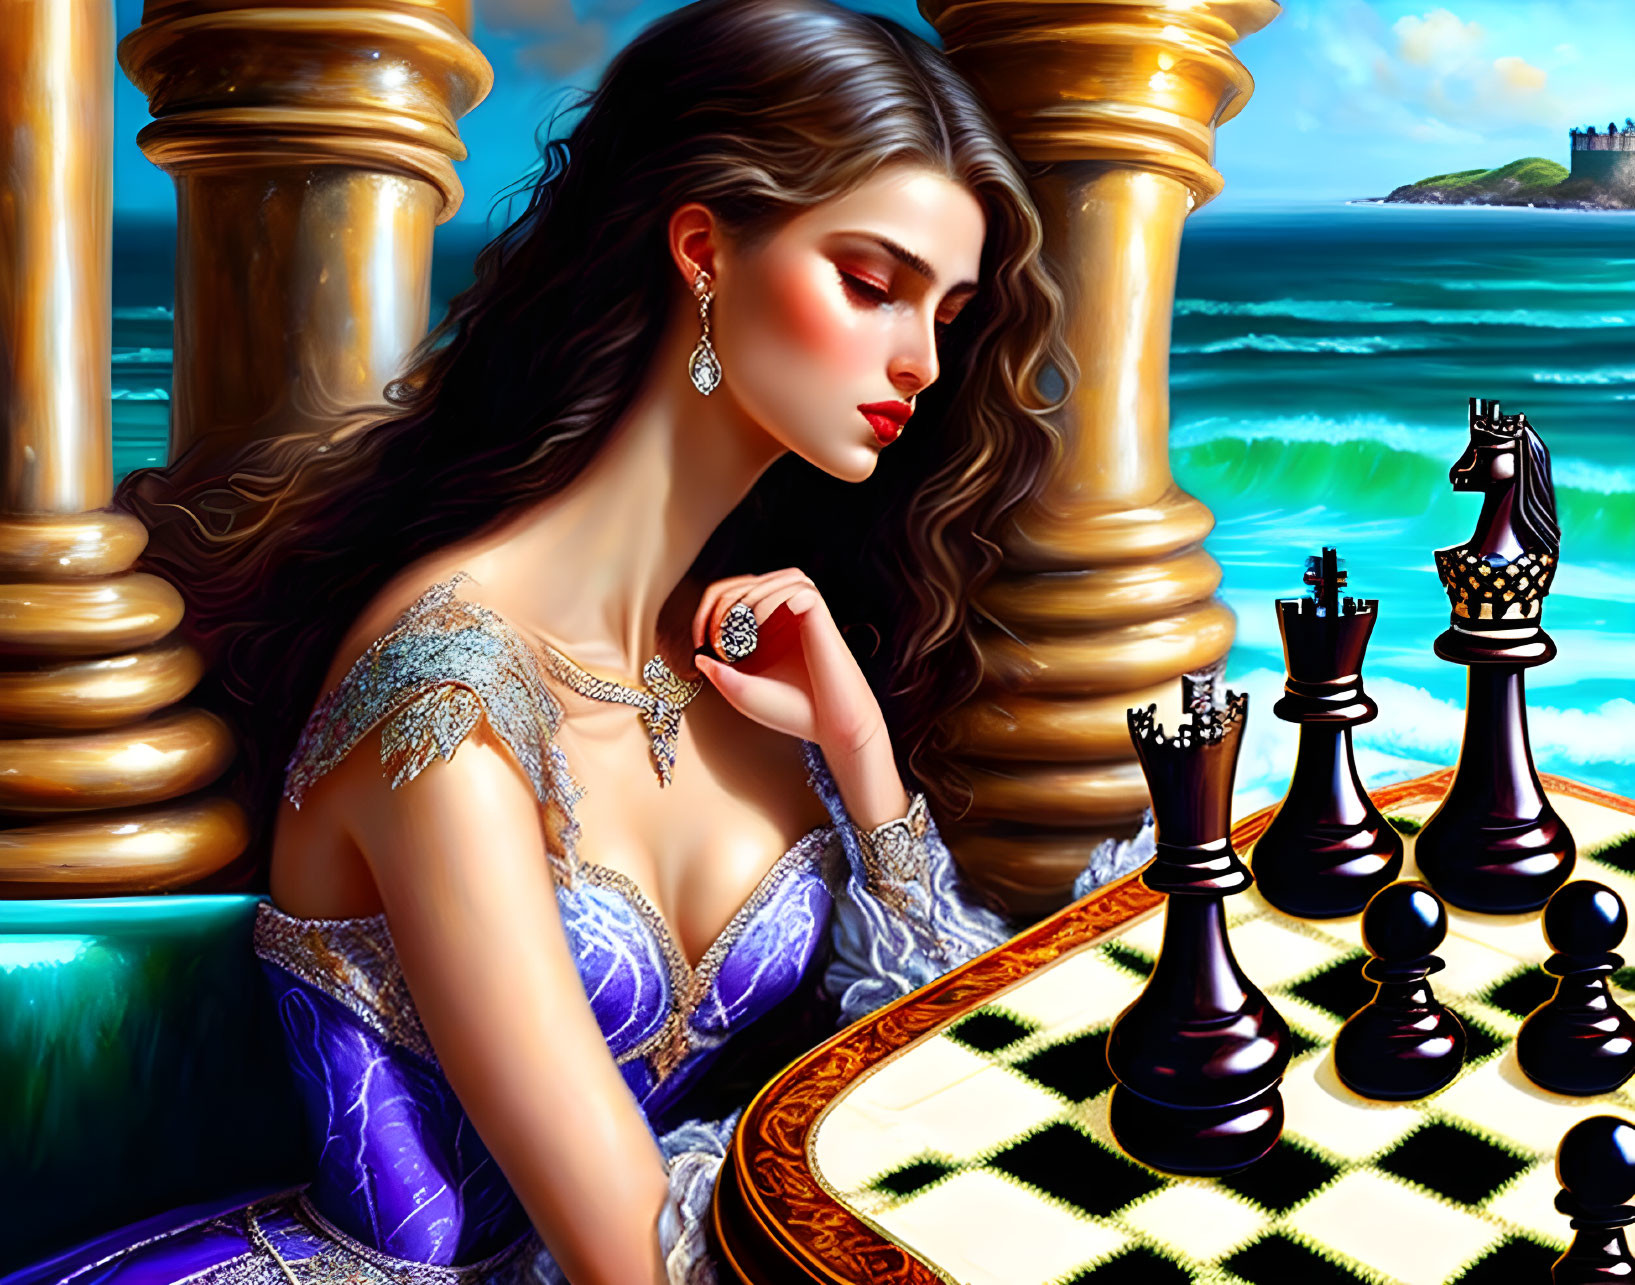 Illustrated woman in purple dress by seaside balcony with chessboard and castle in background